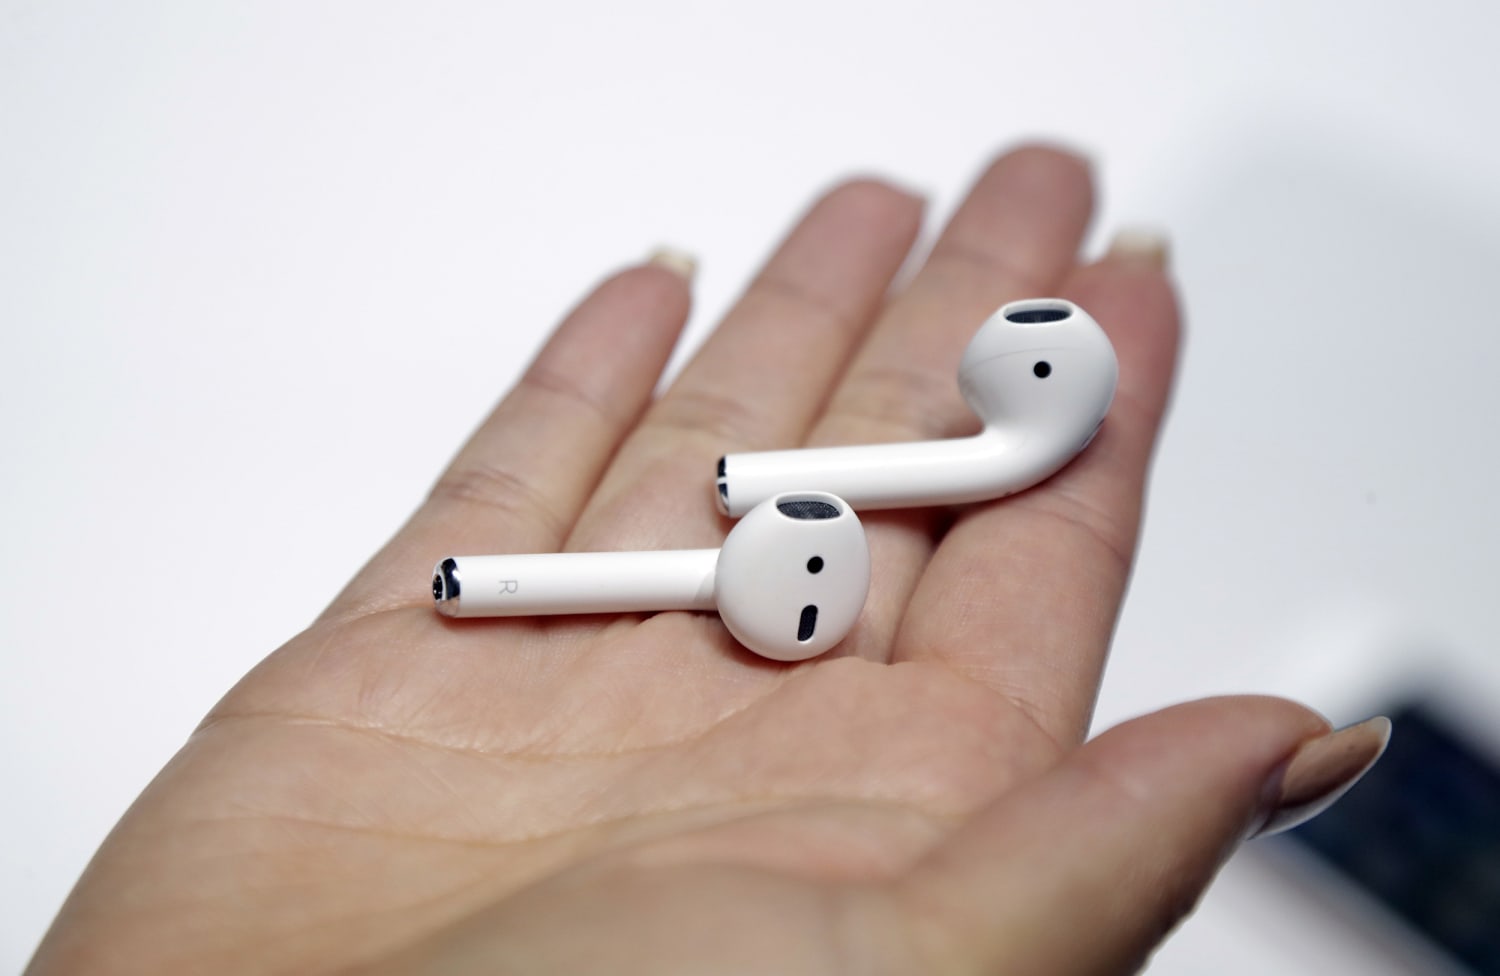 Apple's AirPods changed everything. They gave the company power over users.